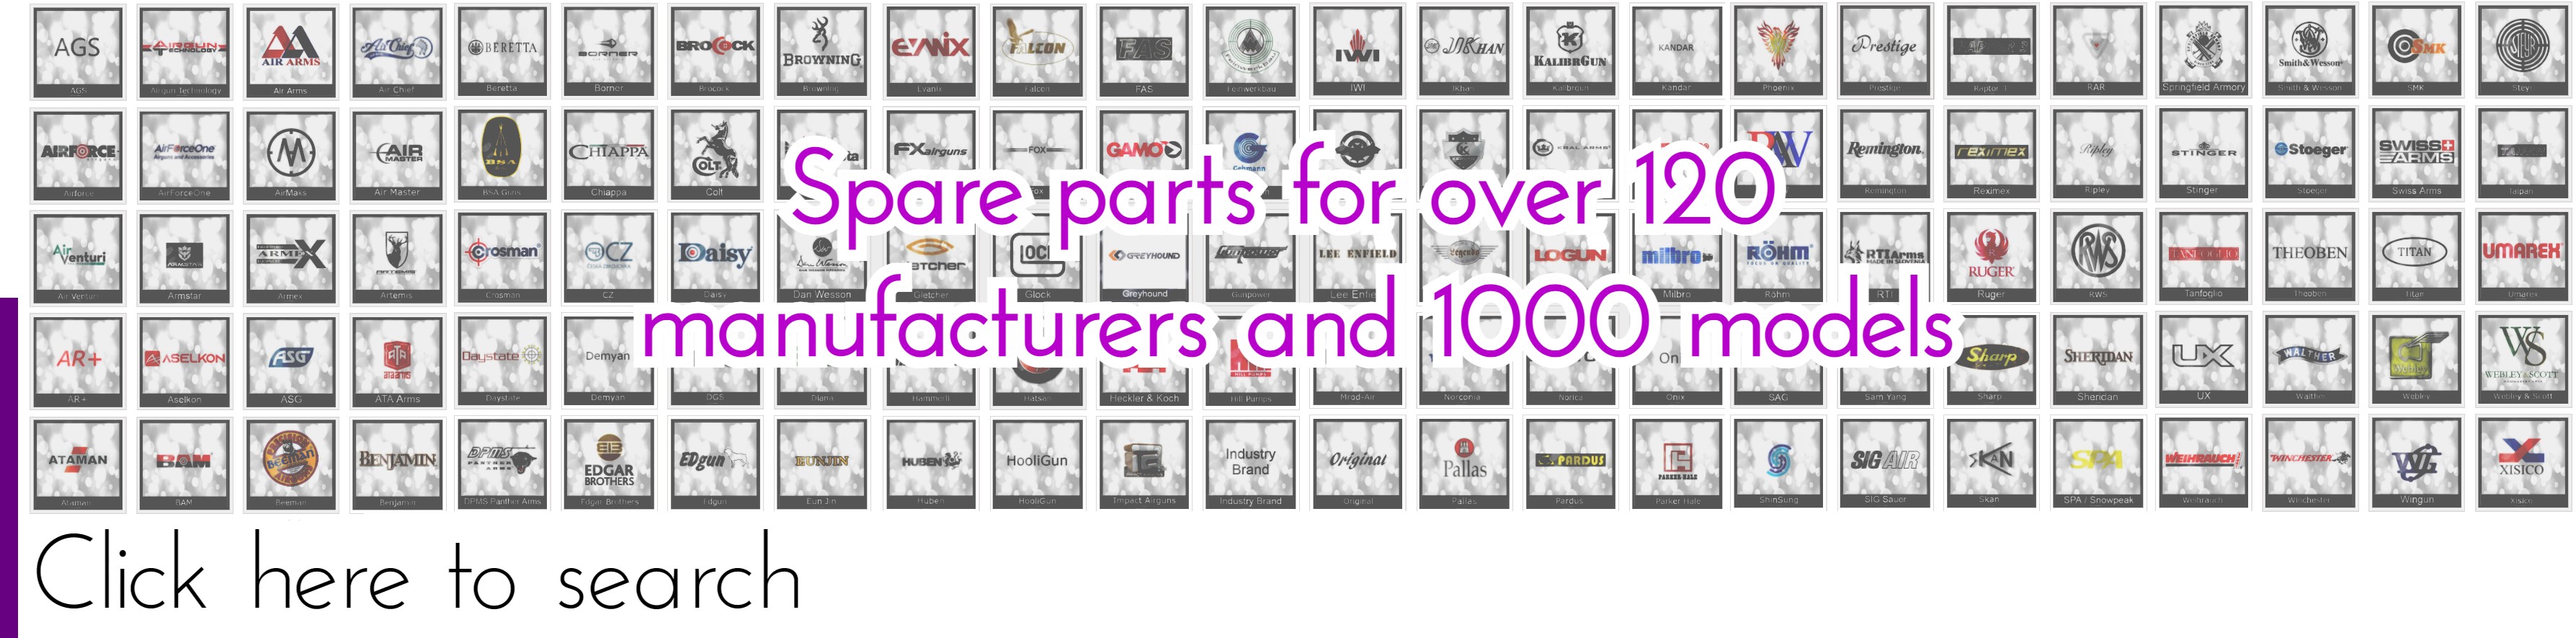 Spares by Manufacturer